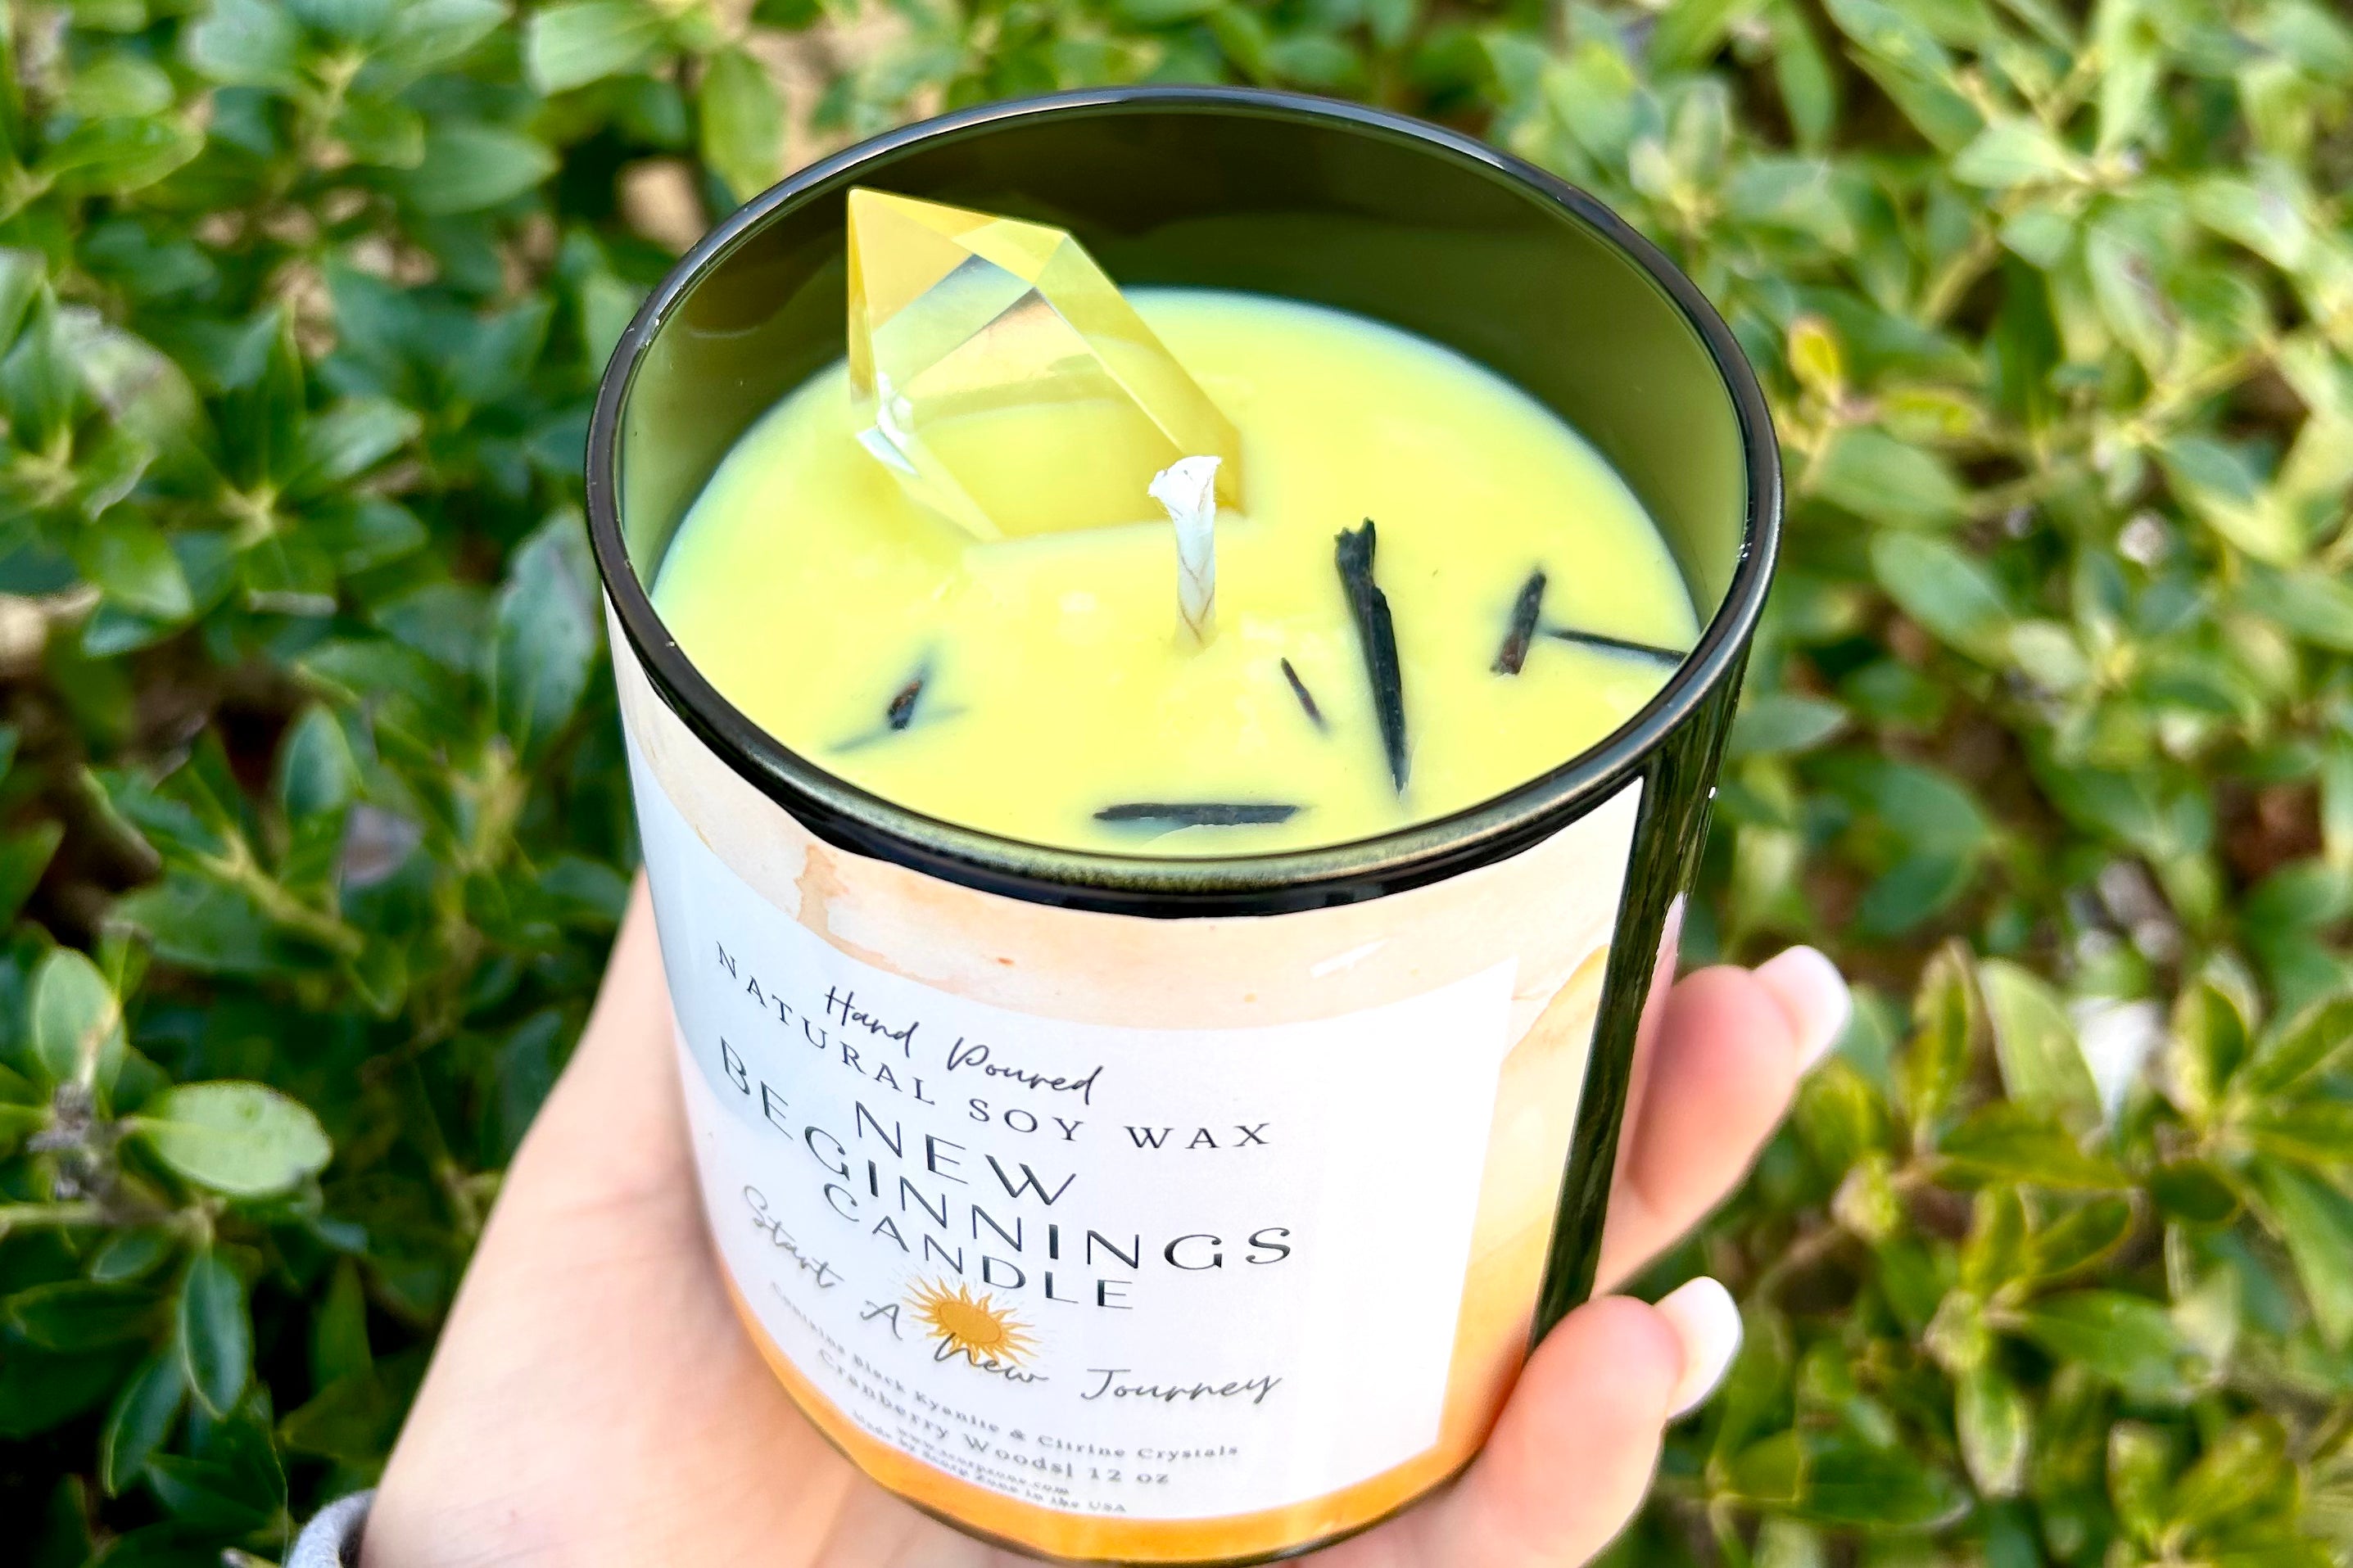 New Beginnings Soy Wax Candle with Citrine Point by Scorp Zone